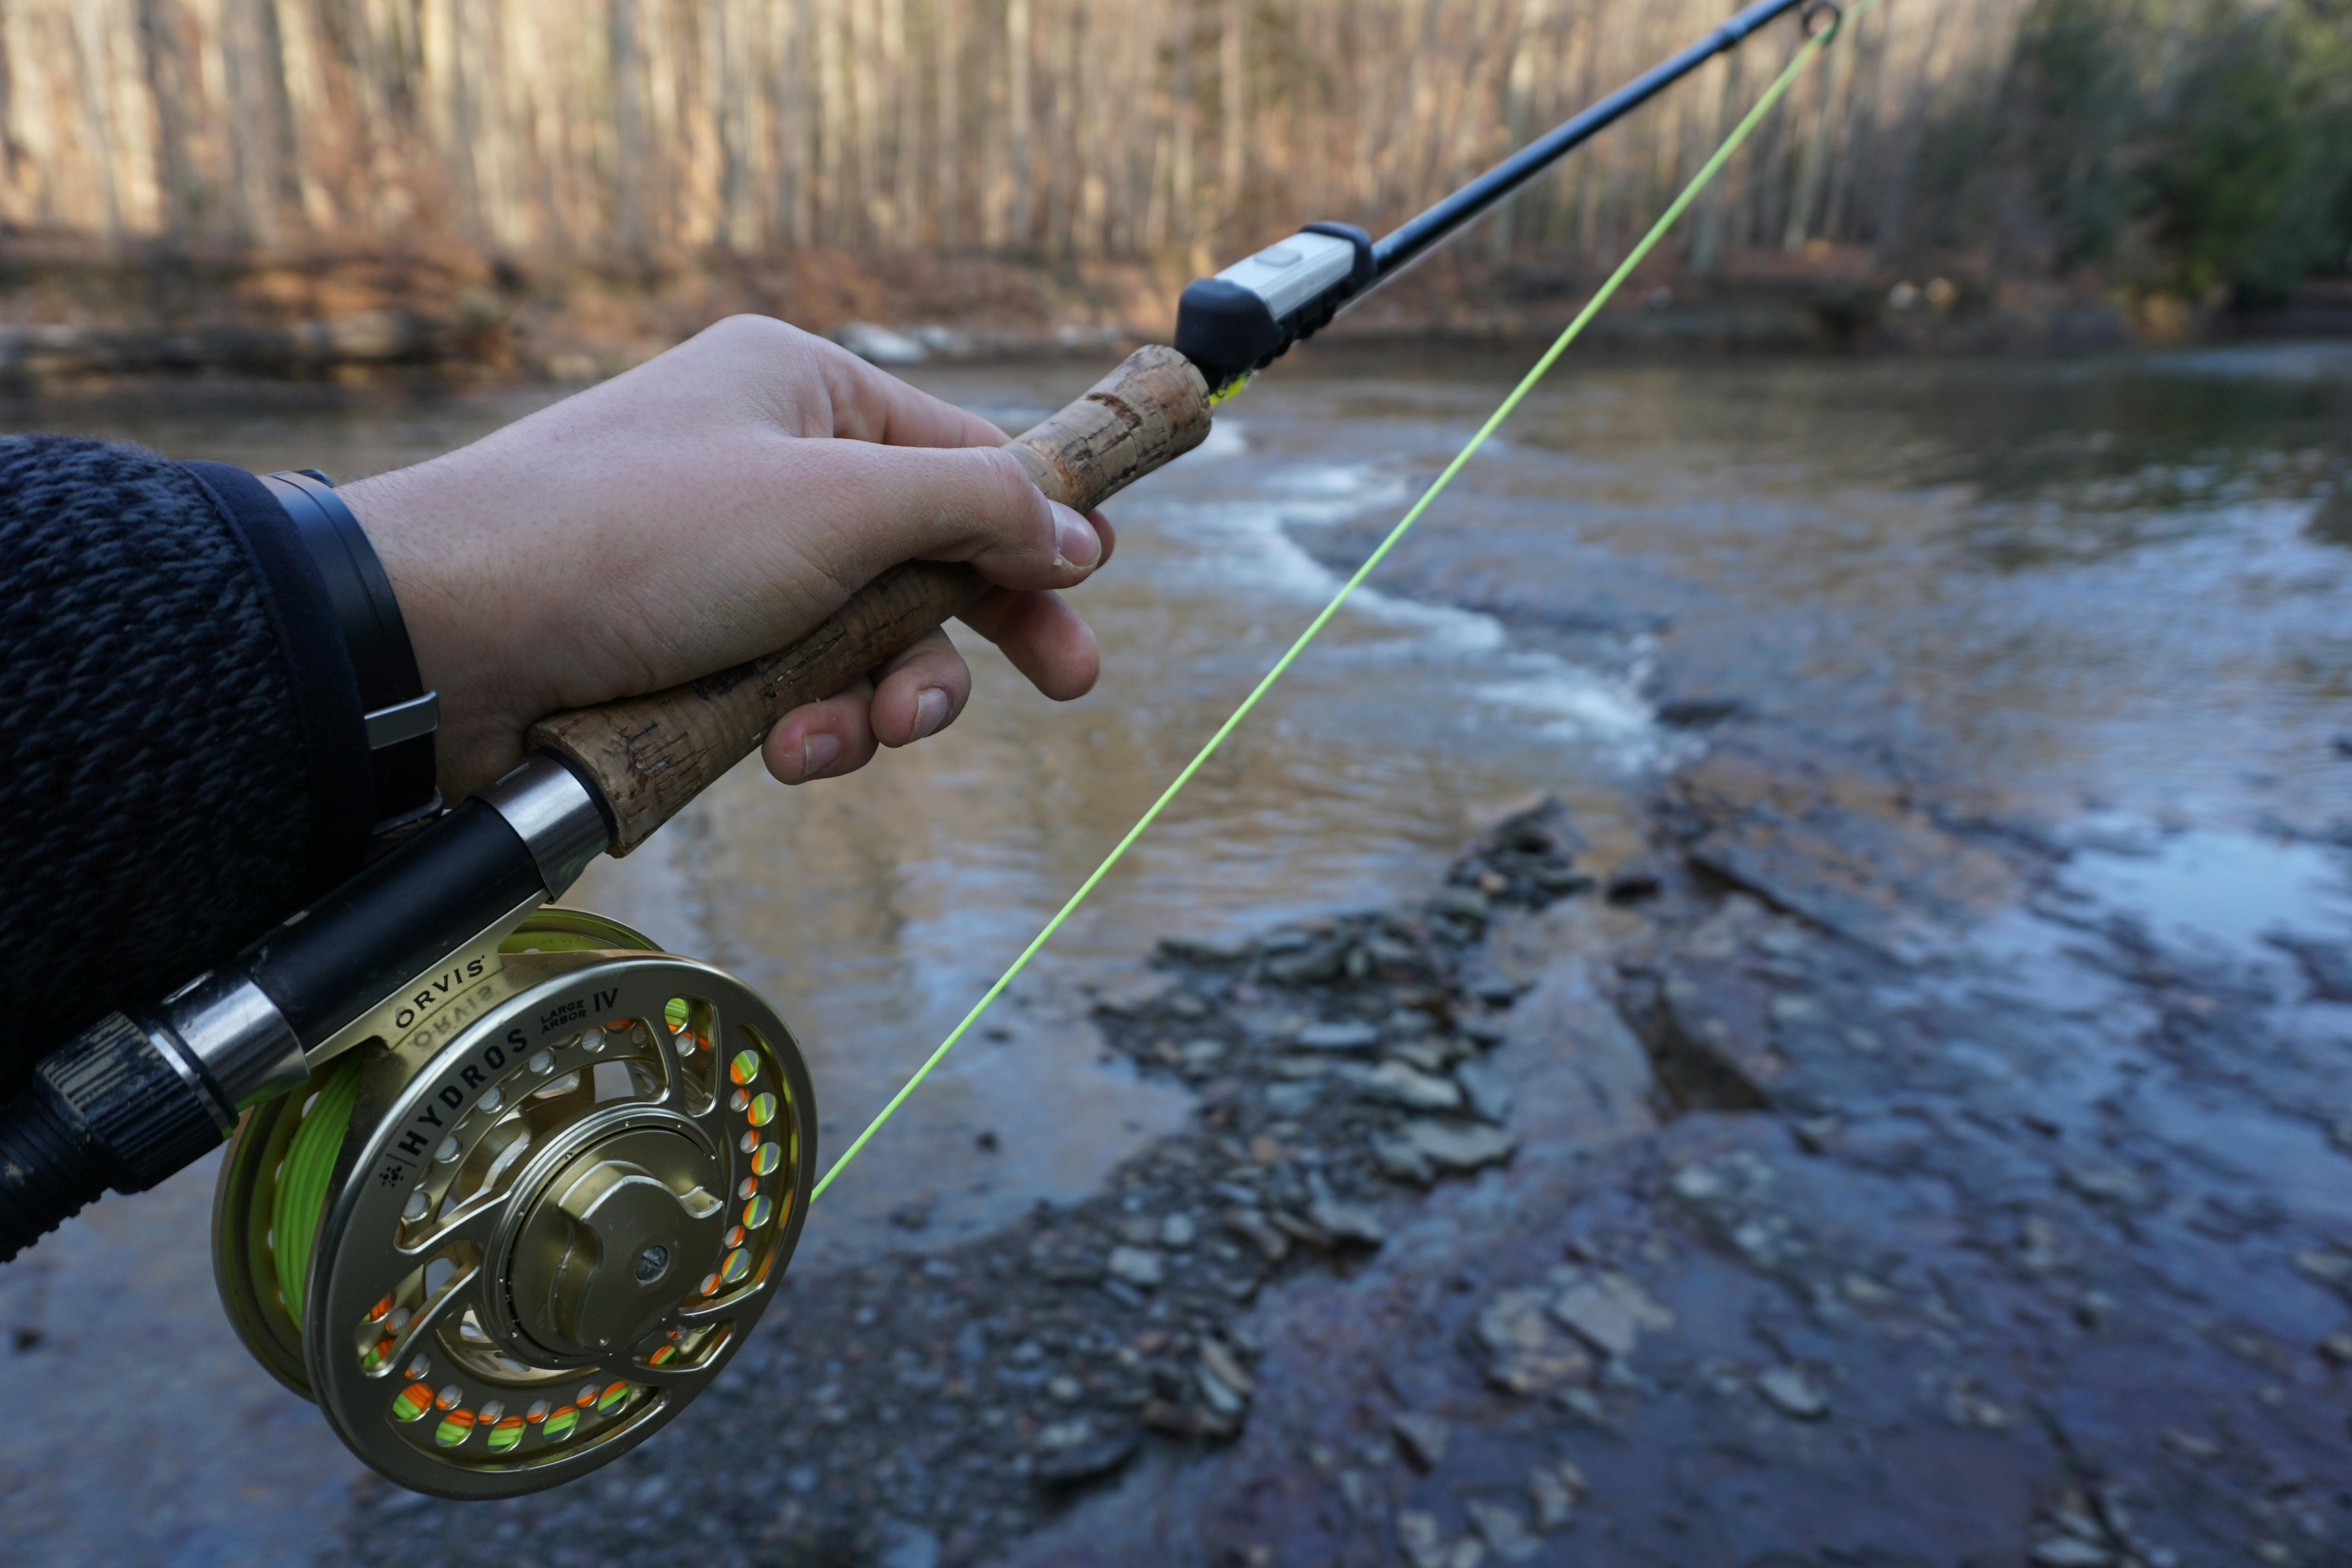  Fly Fishing Wheel,Fishing Reel Fly 5/6 Fly Fishing Reel  Aluminum Body Fly Fishing Wheel Fishing Gear Lake River Fishing Tackle Fly  Fishing Reel Wheels : Sports & Outdoors